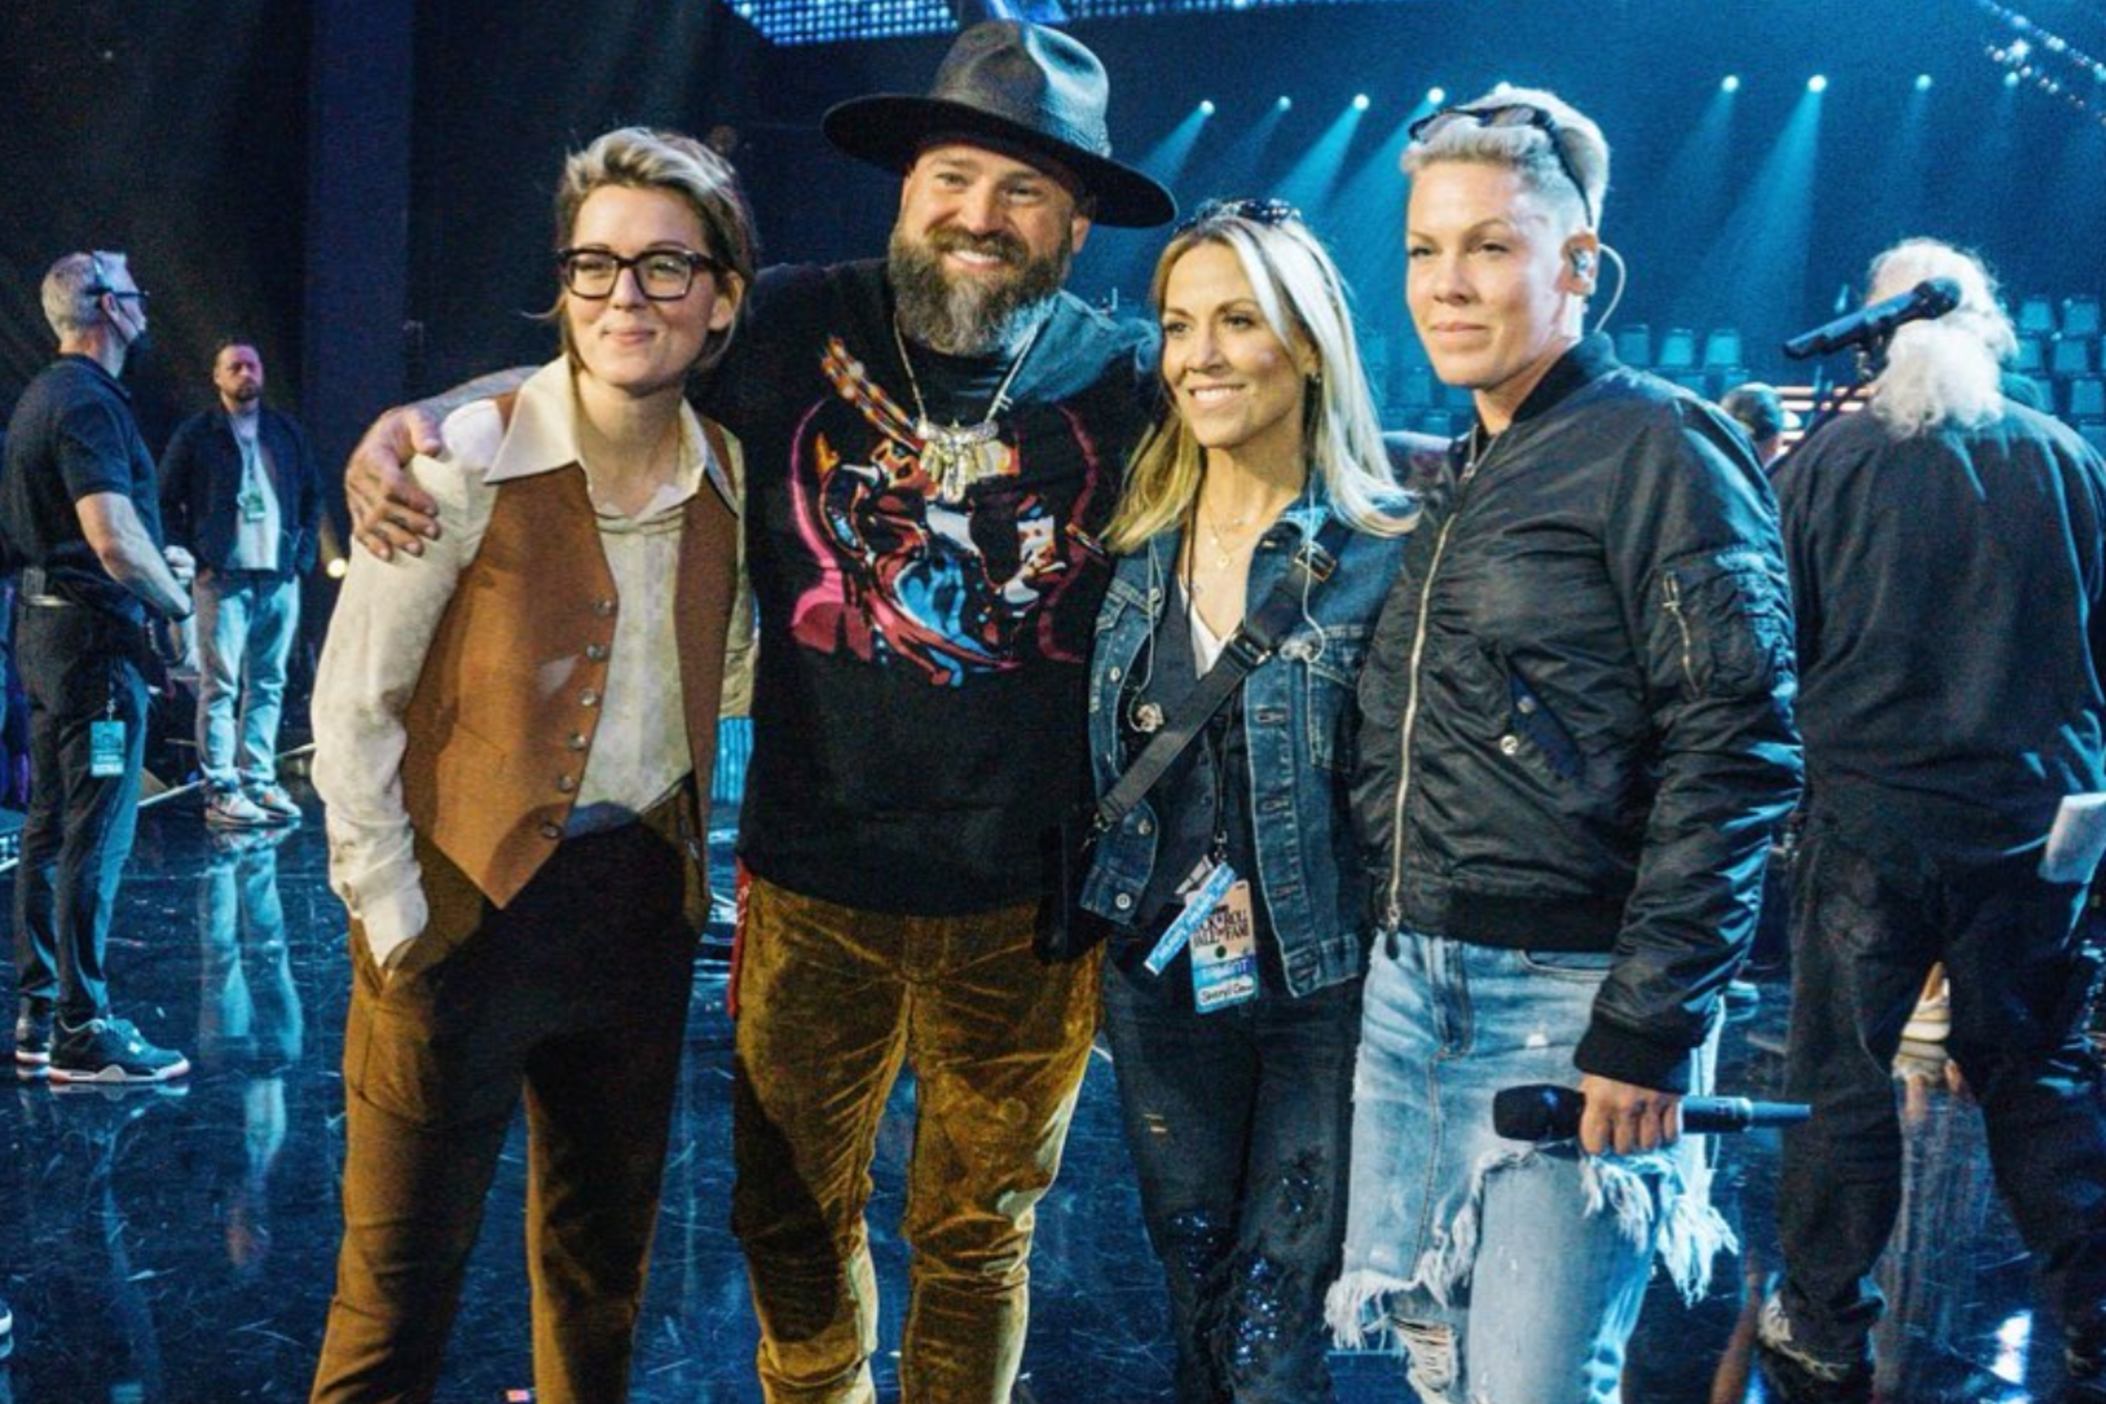 Brandi Carlisle, Zac Brown, Sheryl Crow and Pink gathered to induct Dolly Parton at the 2022 Rock and Roll Hall of Fame Induction Ceremony in Los Angeles on Nov. 5, 2022